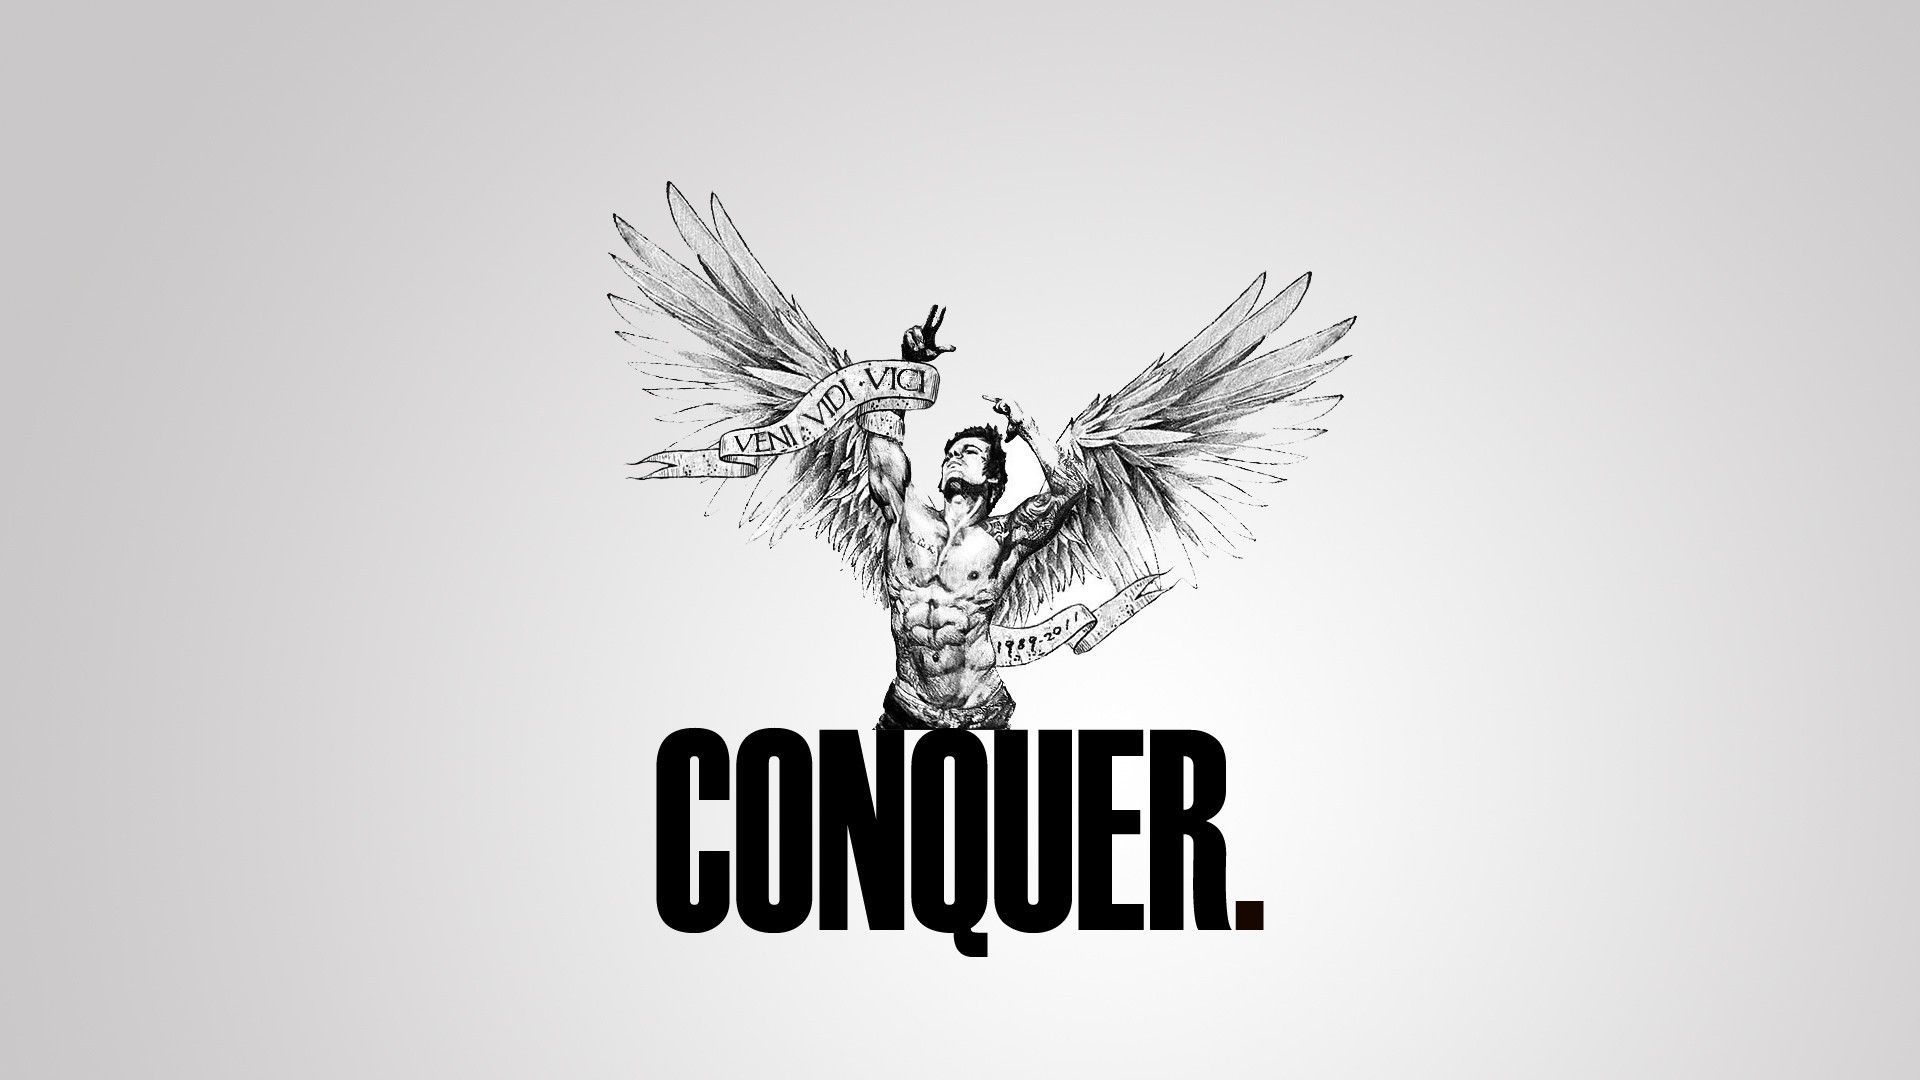 The logo for conqeur, a clothing company - Gym